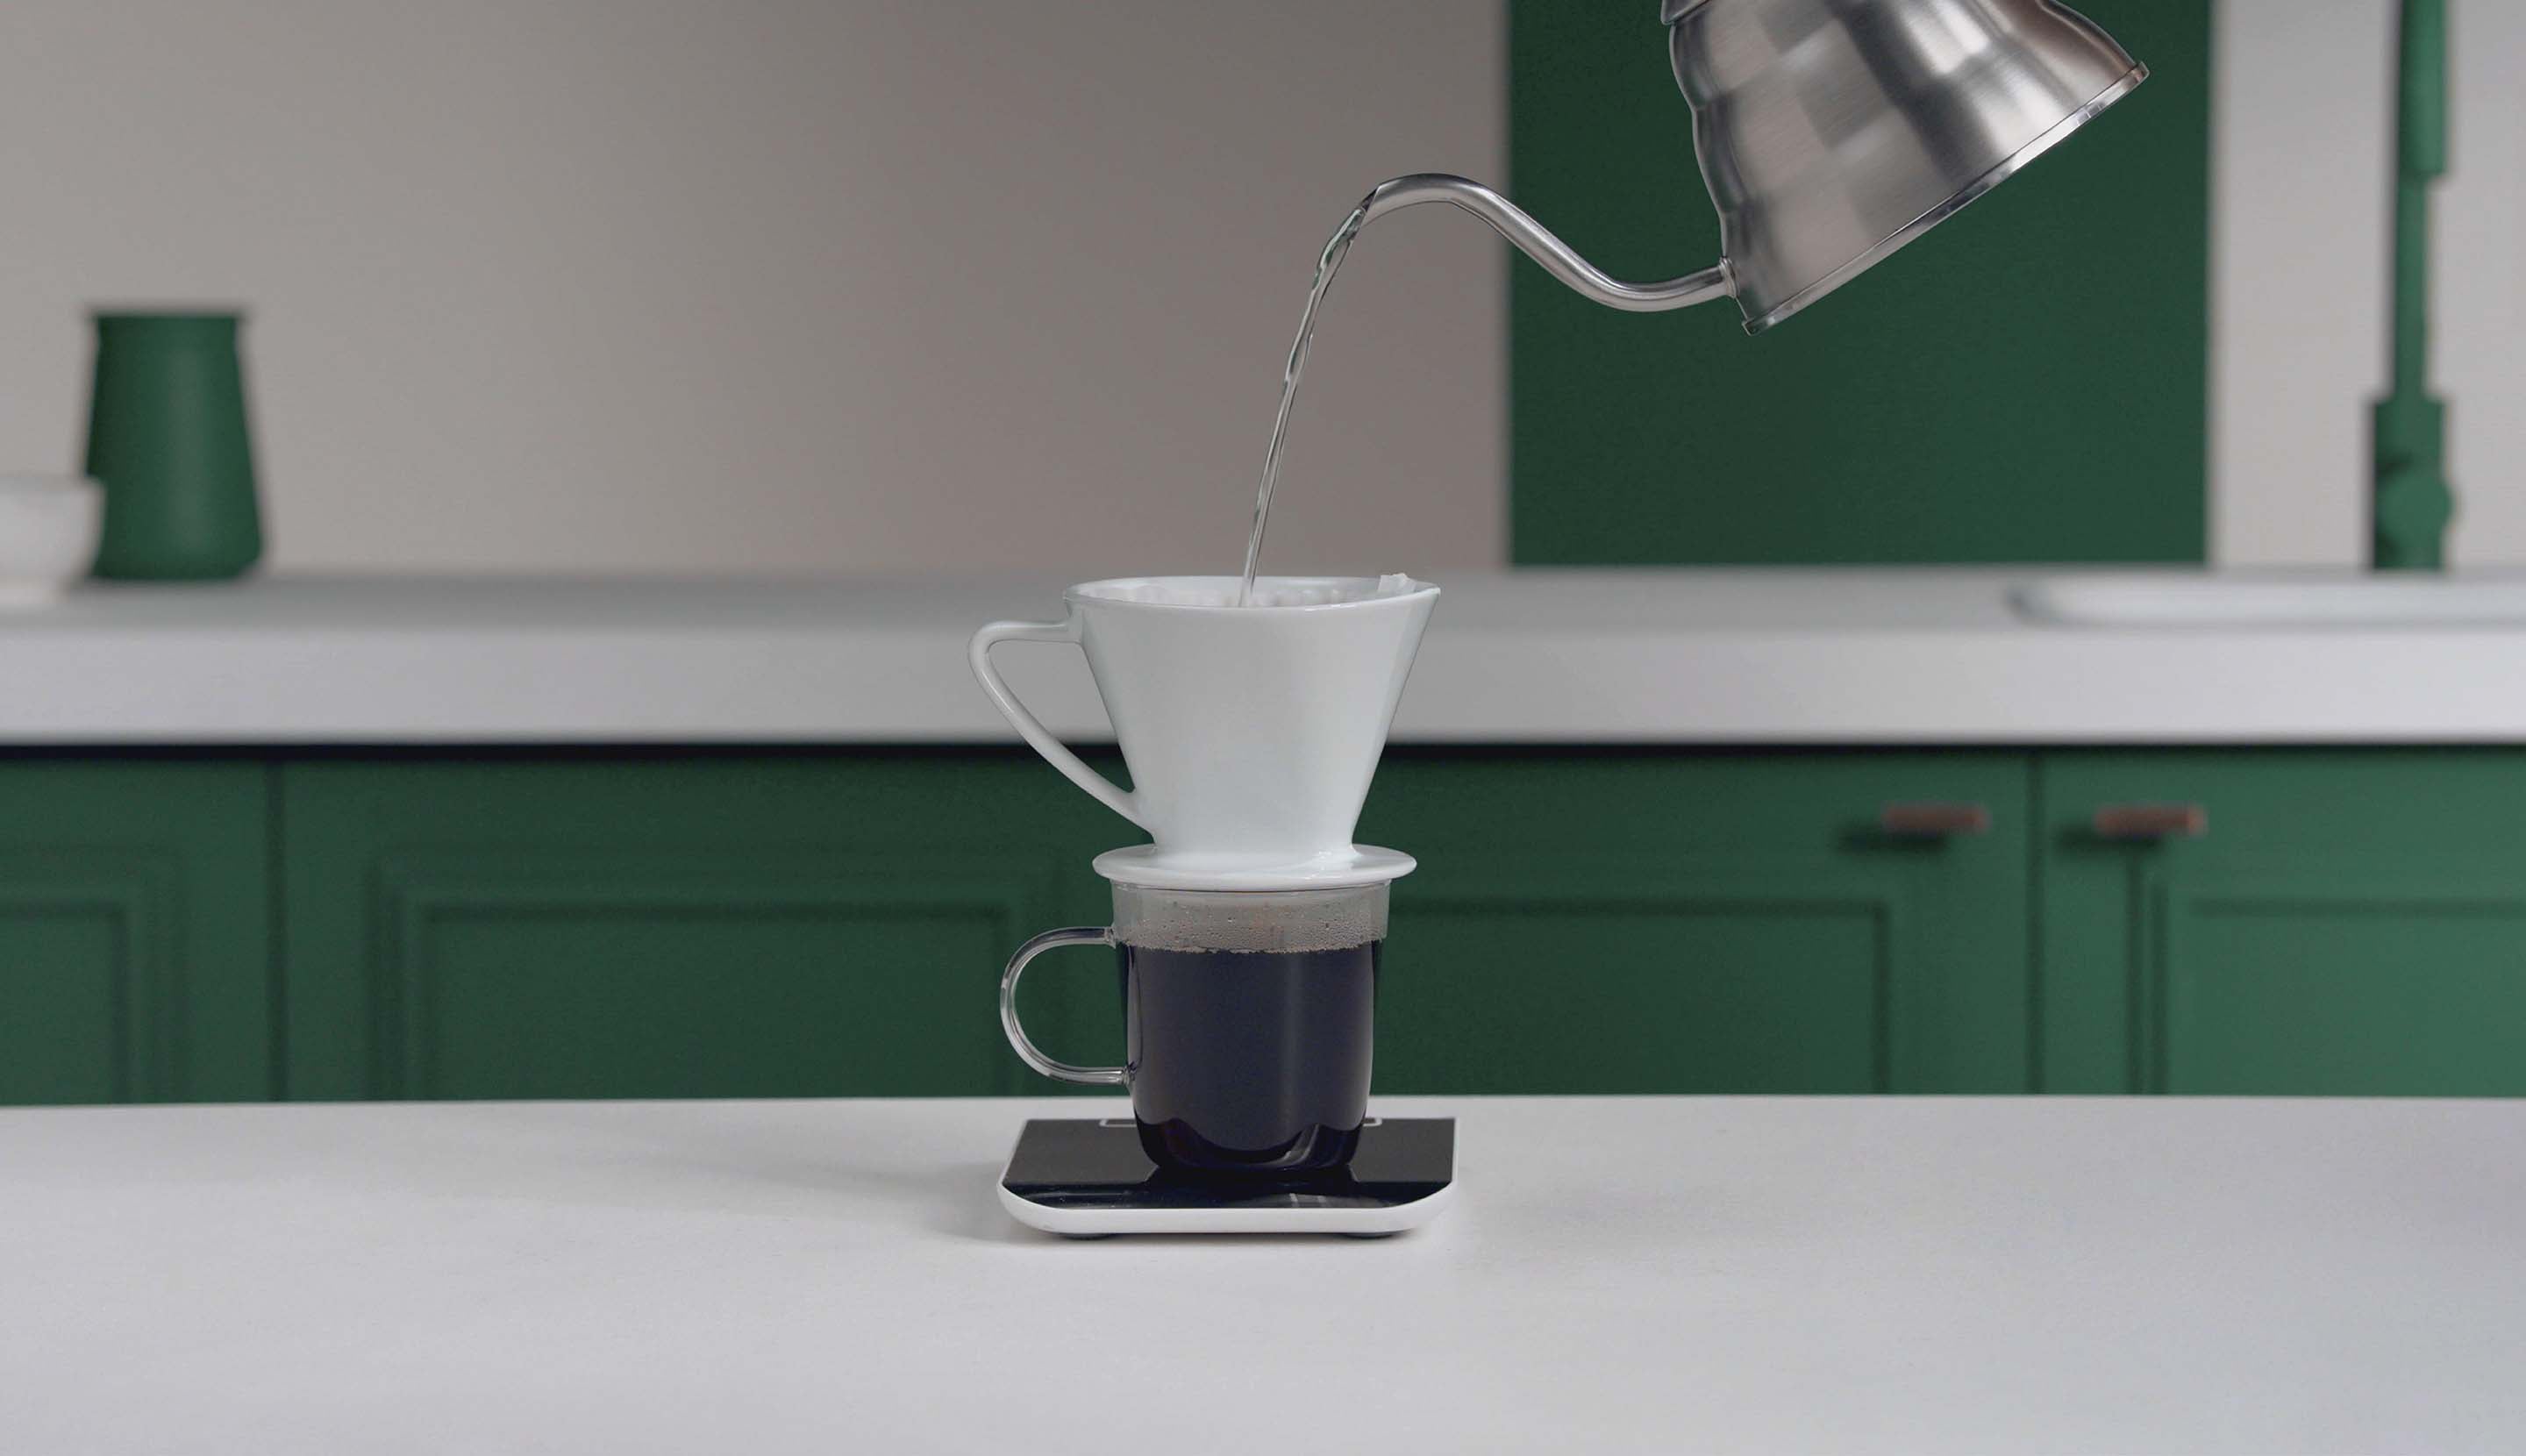 Make Barista-Level Coffee At Home With This Pour Over Coffee Maker